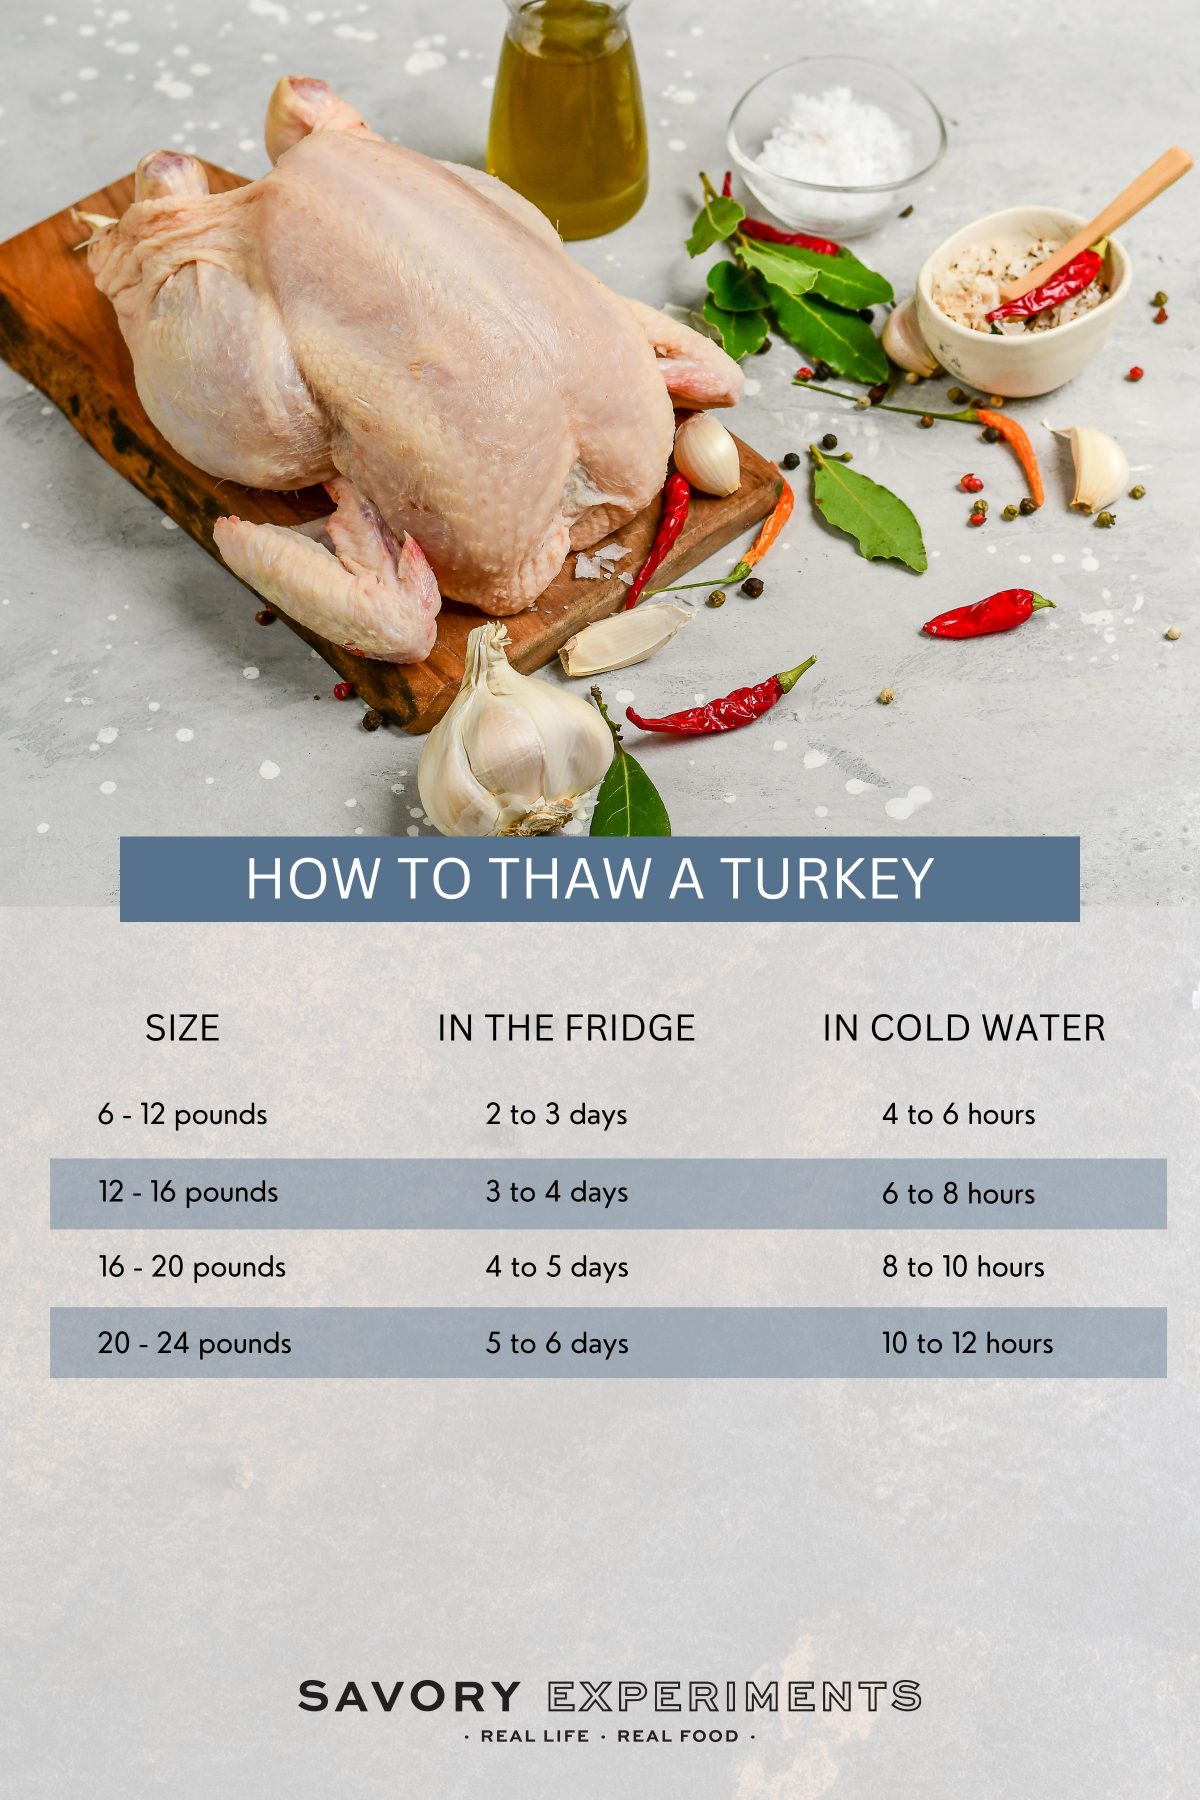 how to thaw a turkey infographic and chart